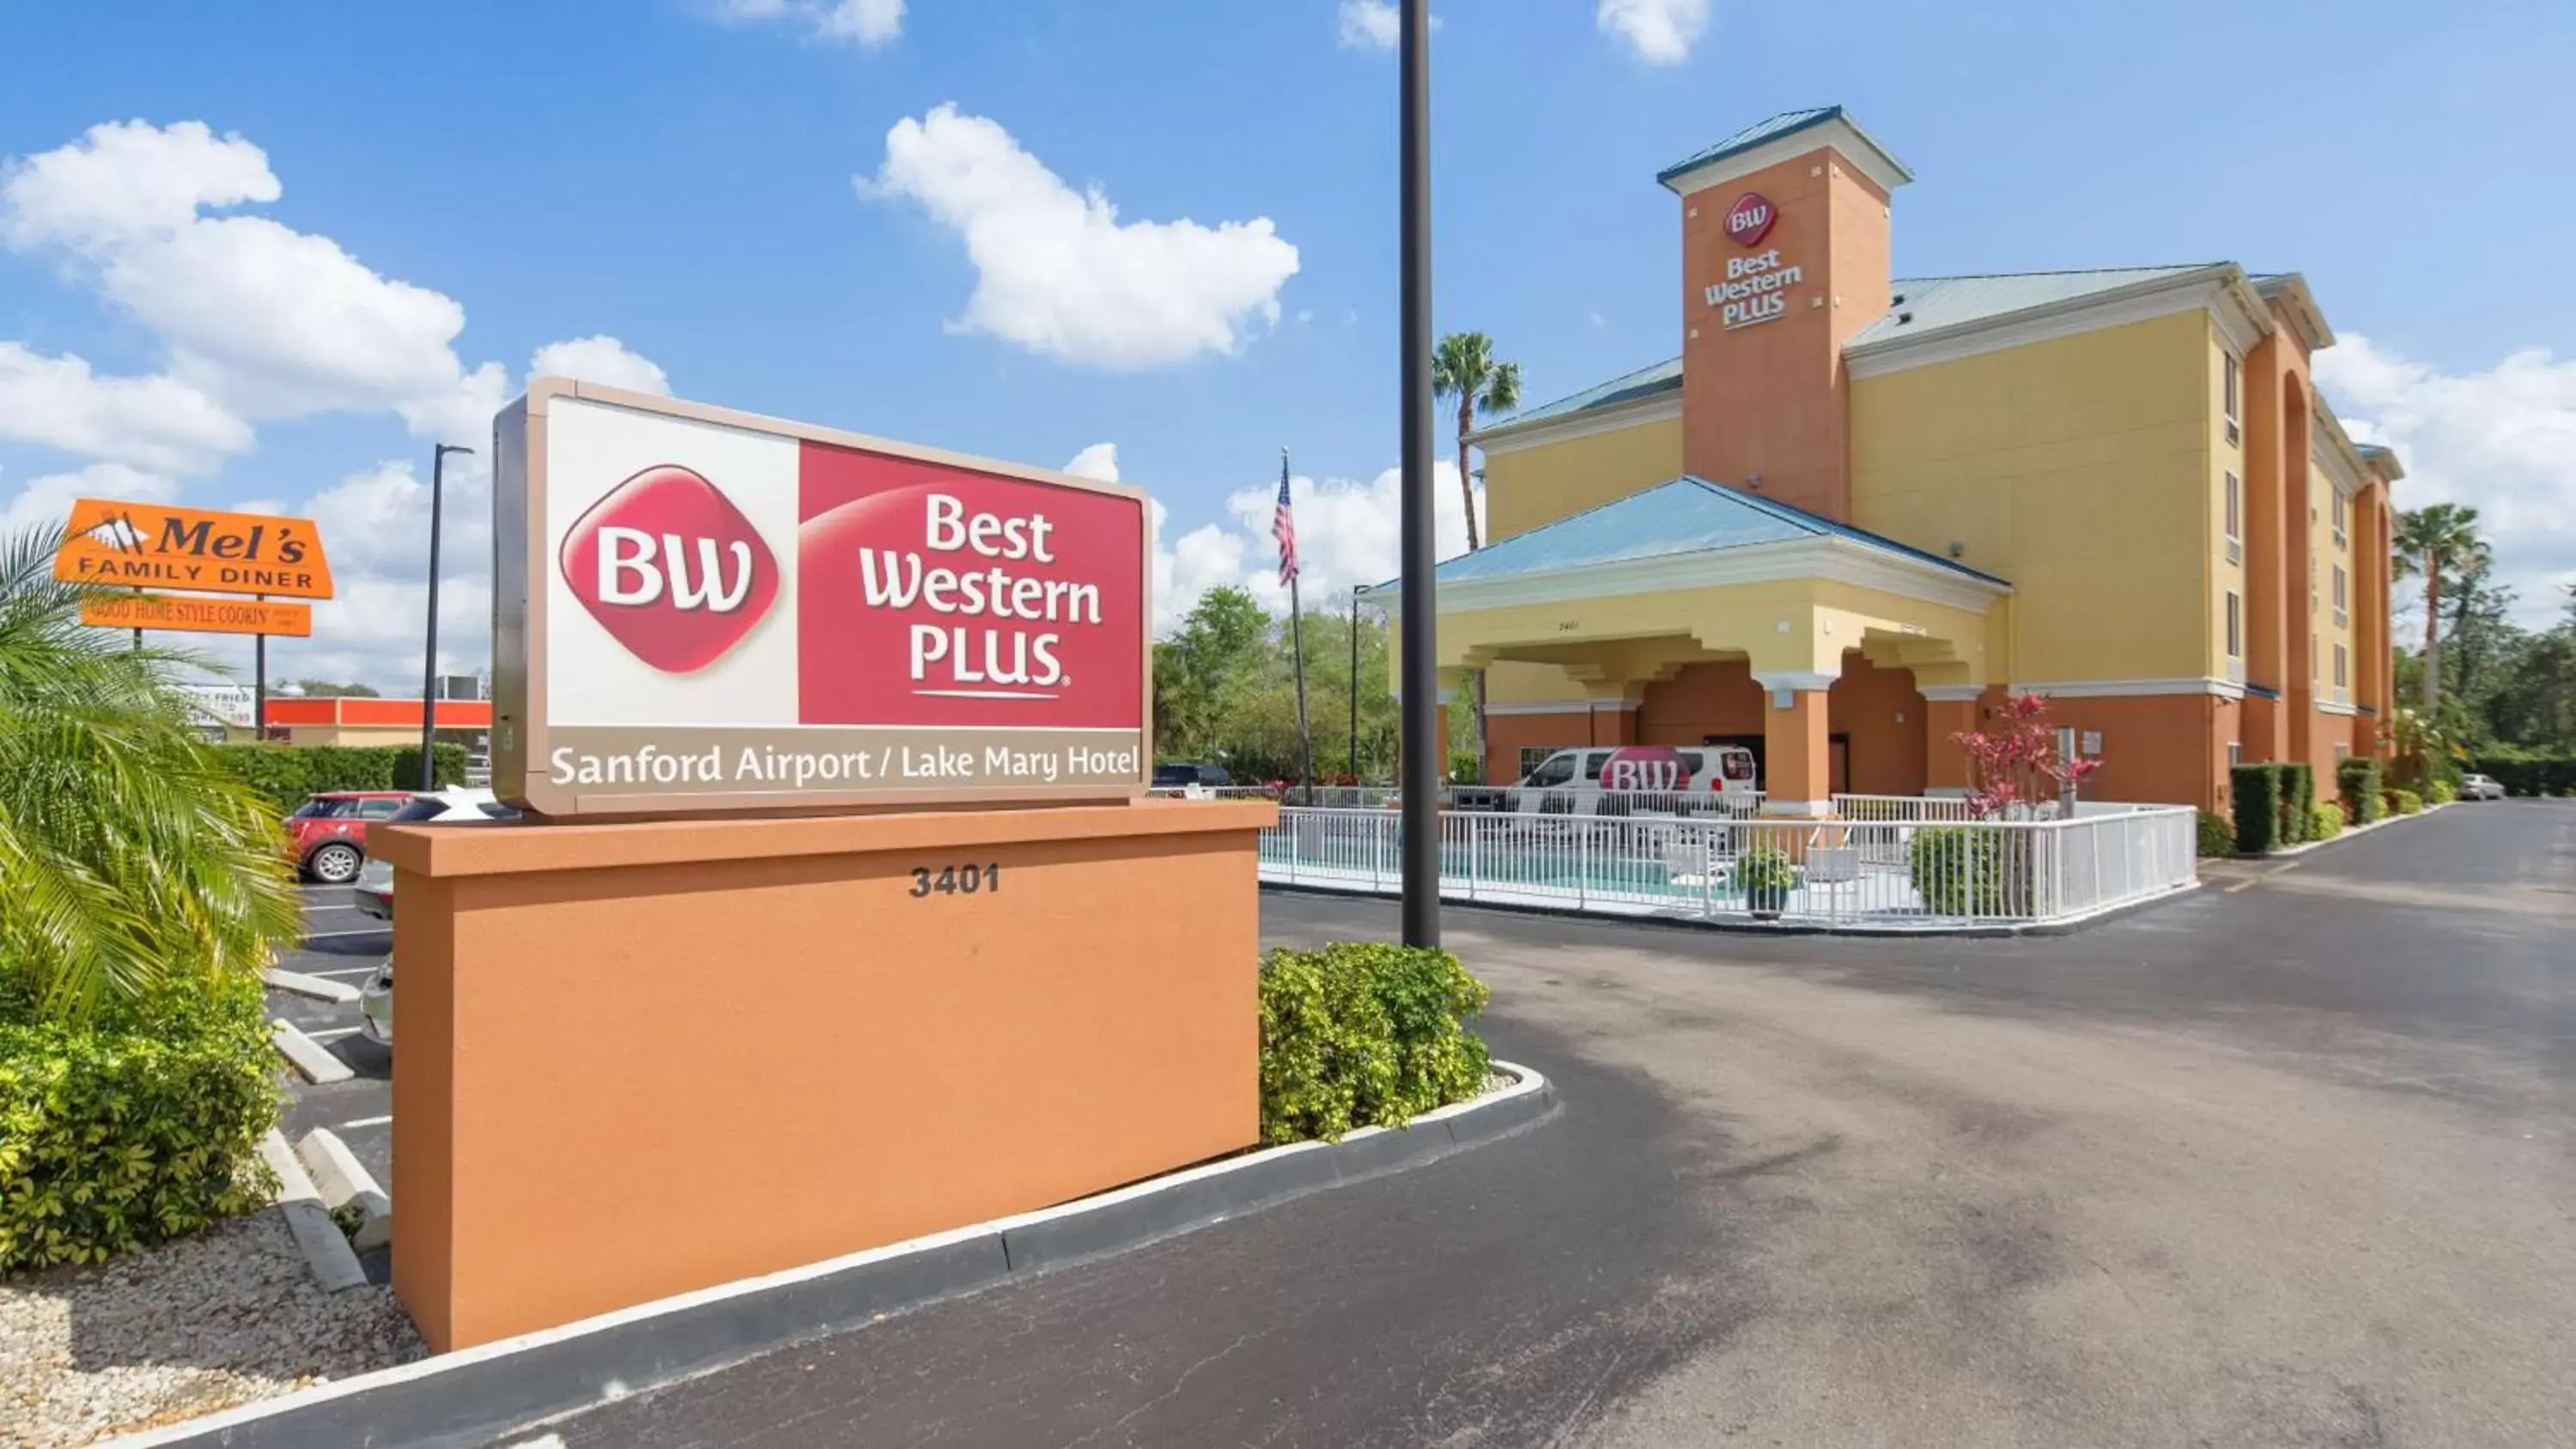 Property building in Best Western Plus Sanford Airport/Lake Mary Hotel